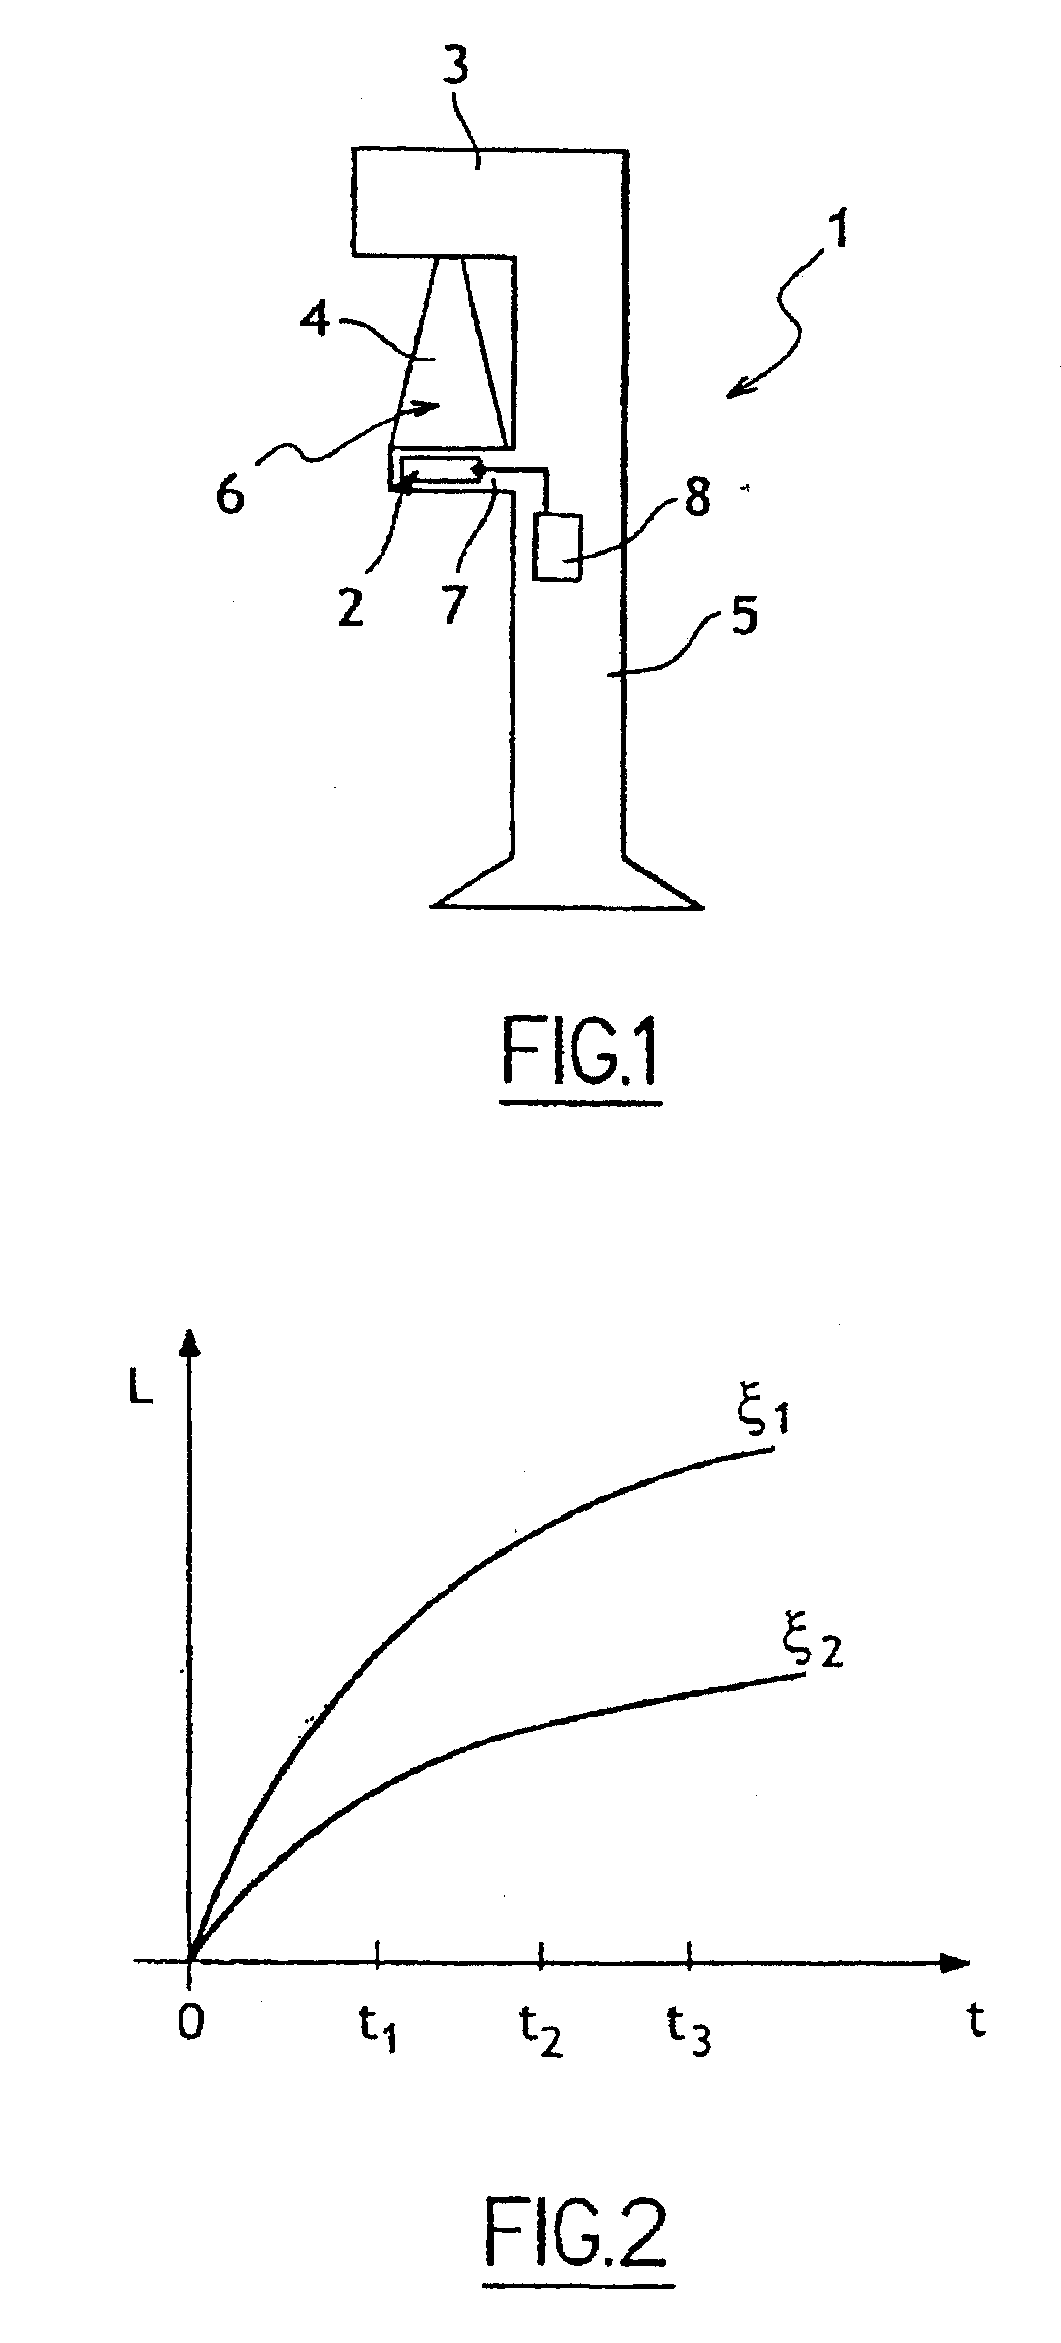 Method and Apparatus for Calibration and Correction of Gray Levels in Images